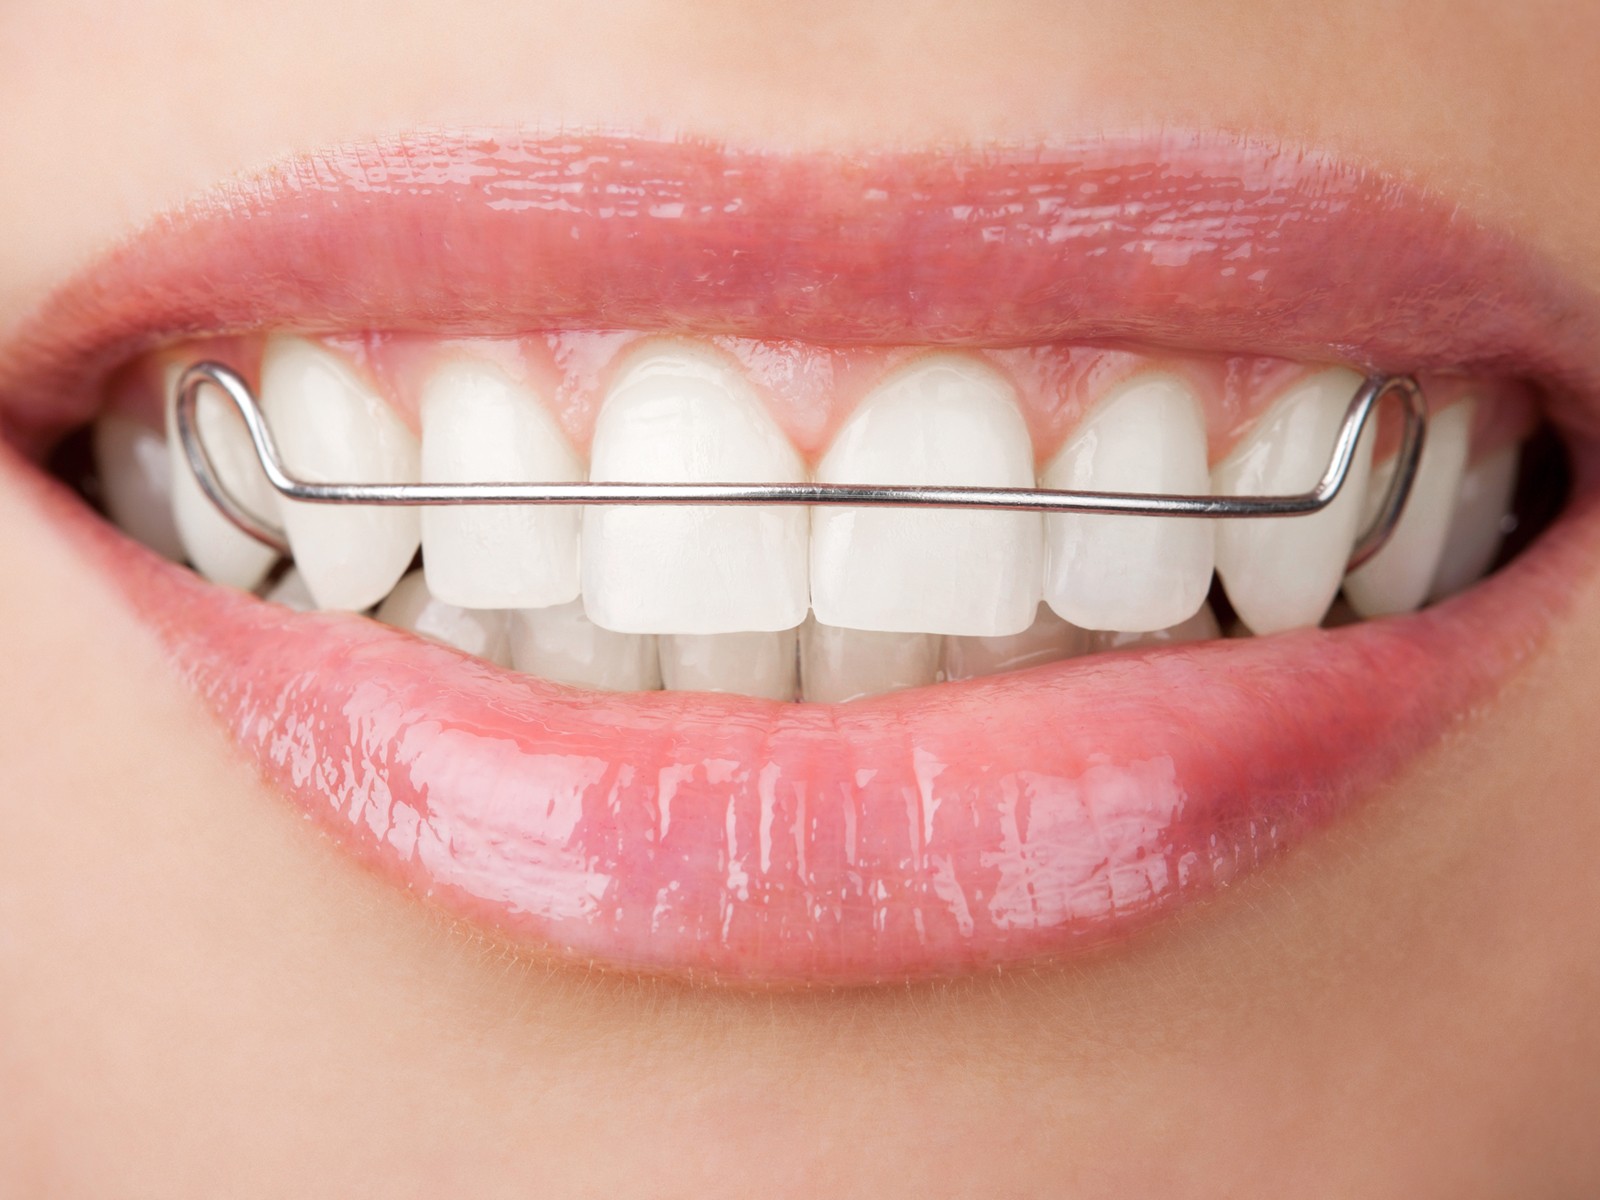 Are retainers good for your teeth?